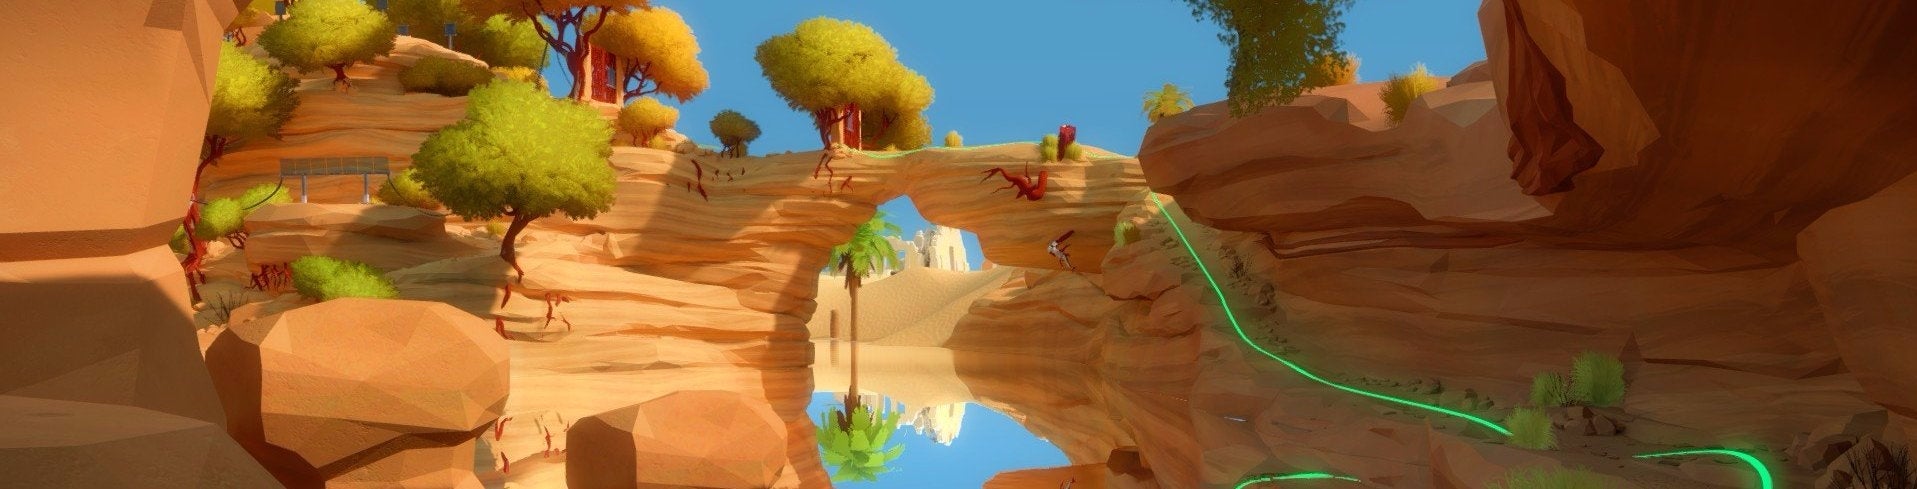 Image for In Play: Why getting stuck in The Witness is good for you